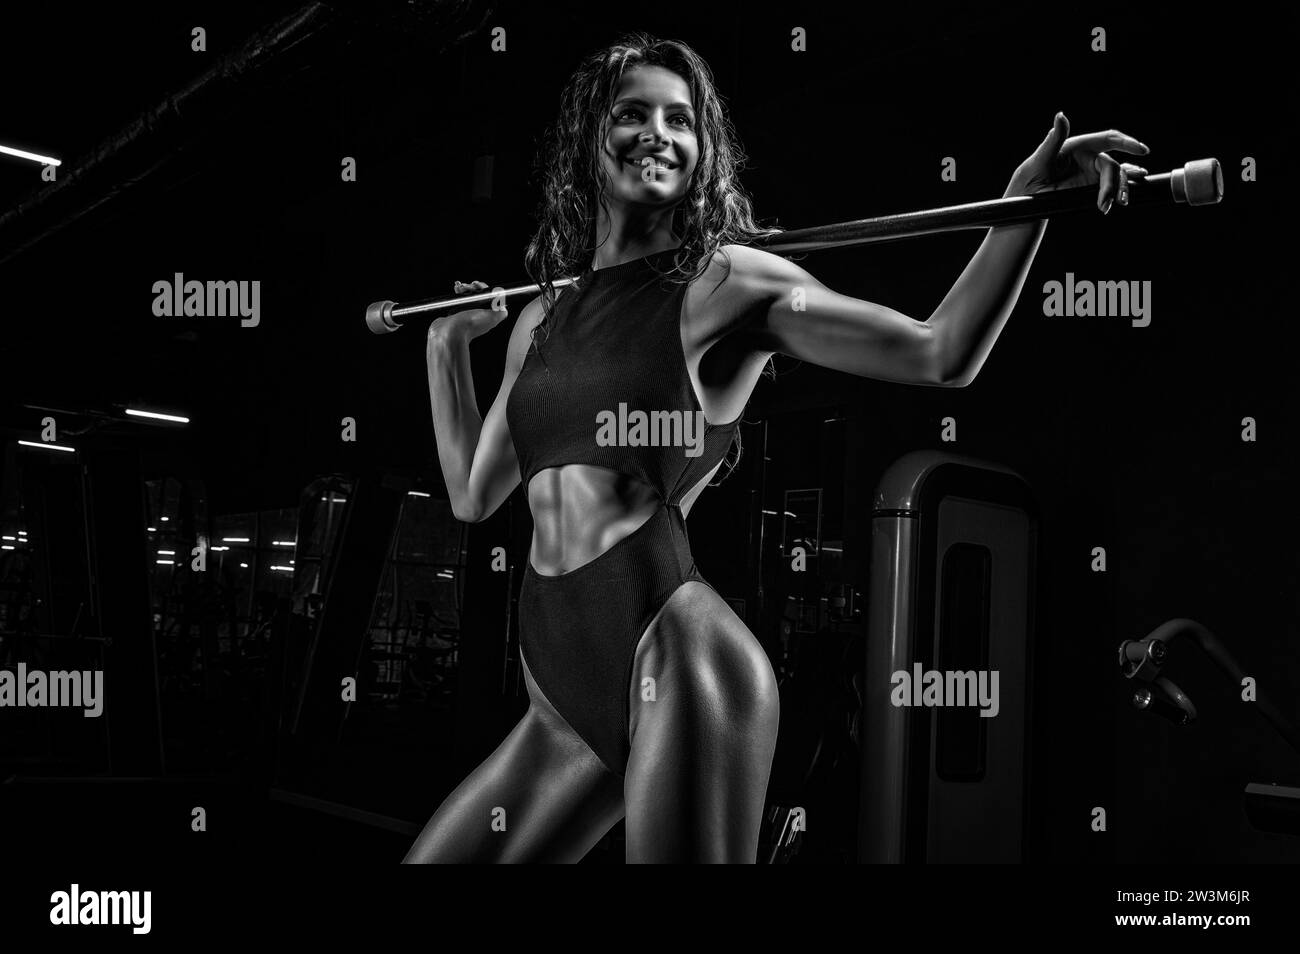 Charming girl posing with a bodybar. The concept of fitness, bodybuilding and healthy lifestyle. Mixed media Stock Photo